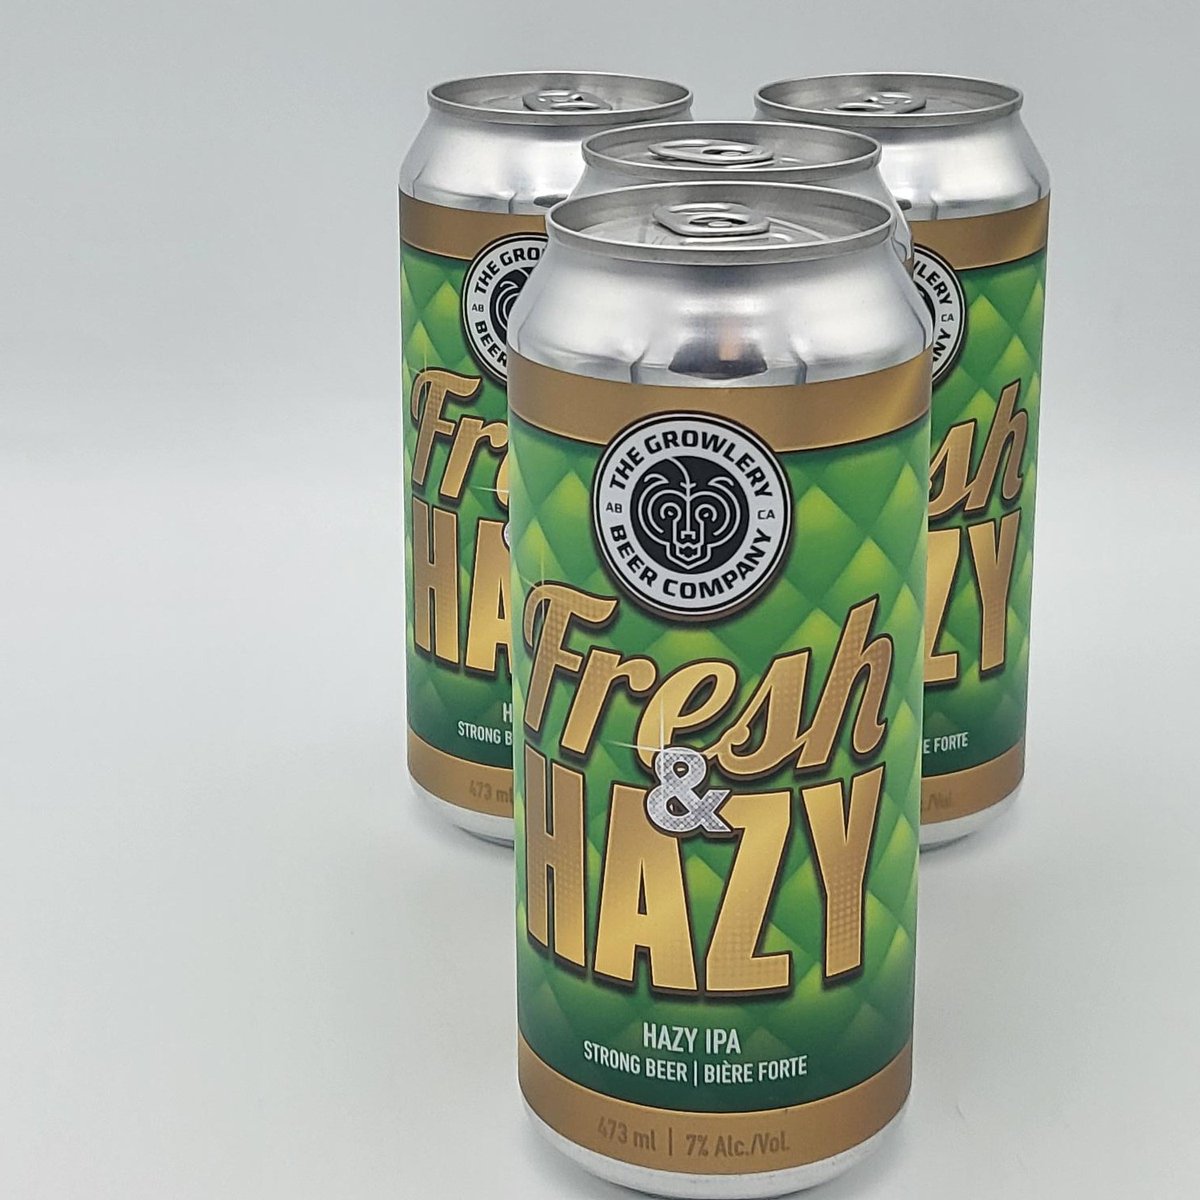 Just arrived! From Edmonton, Fresh and Hazy Hazy IPA. Get ready for a smooth, hazy IPA, with floral notes on the nose, and a citrus explosion on the on the palate. Brewed with HBC 586, Motueka, Citra, Pahlo hops, for a tropical party in your glass. 7% abv. @GrowleryBeer